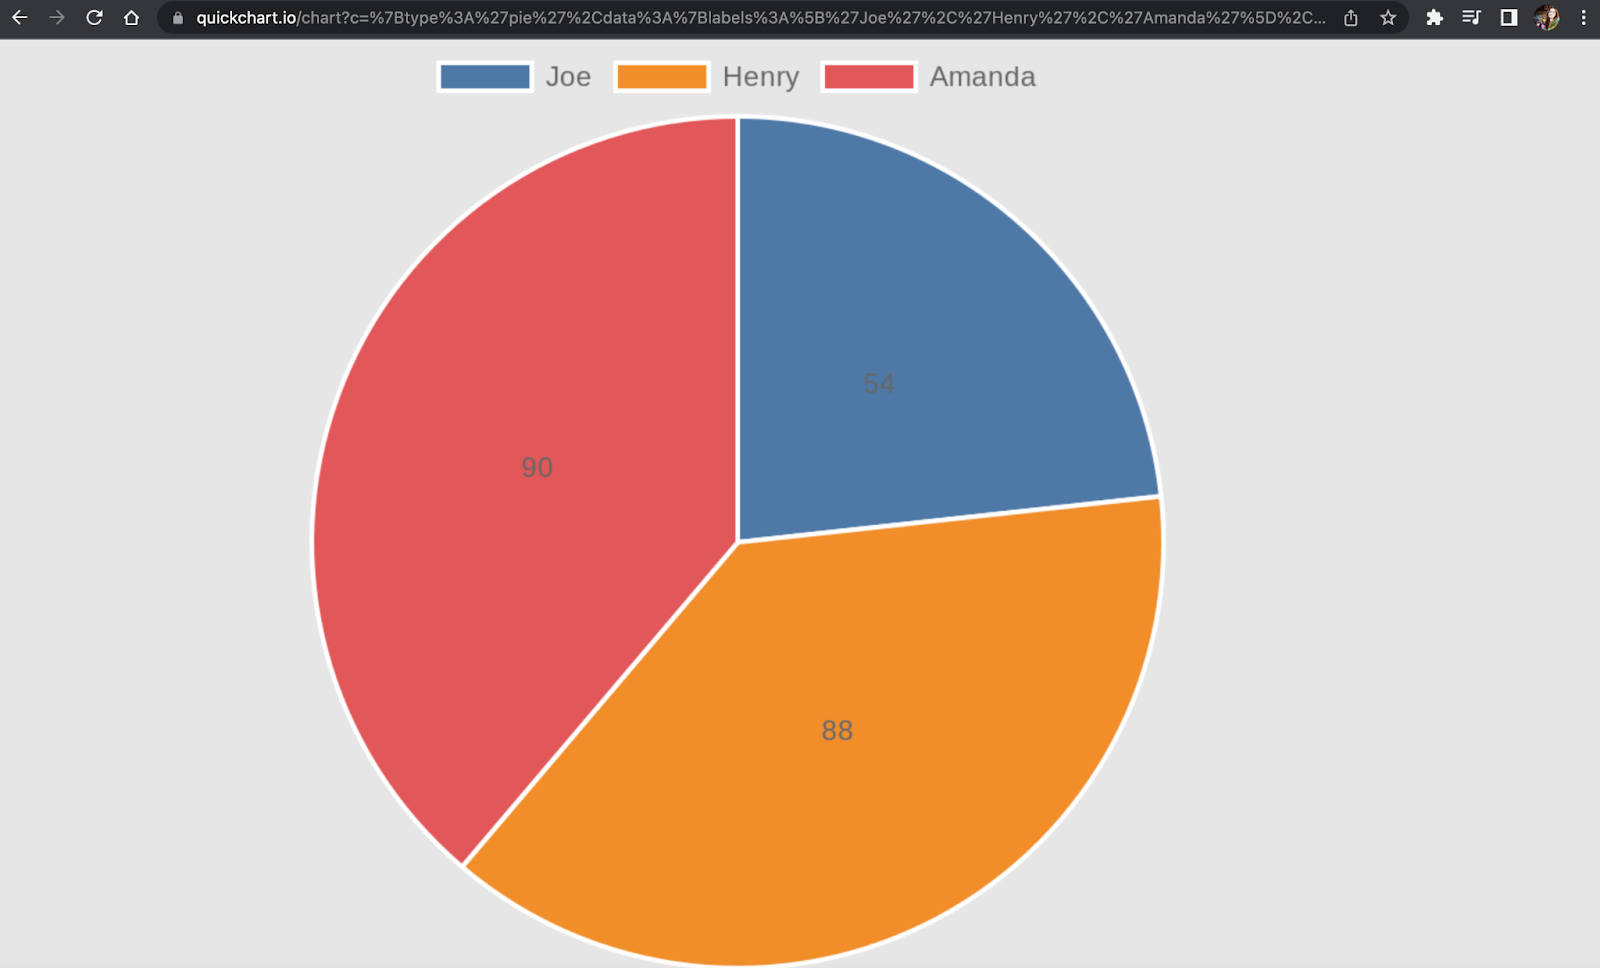 Pie chart image with Notion database data